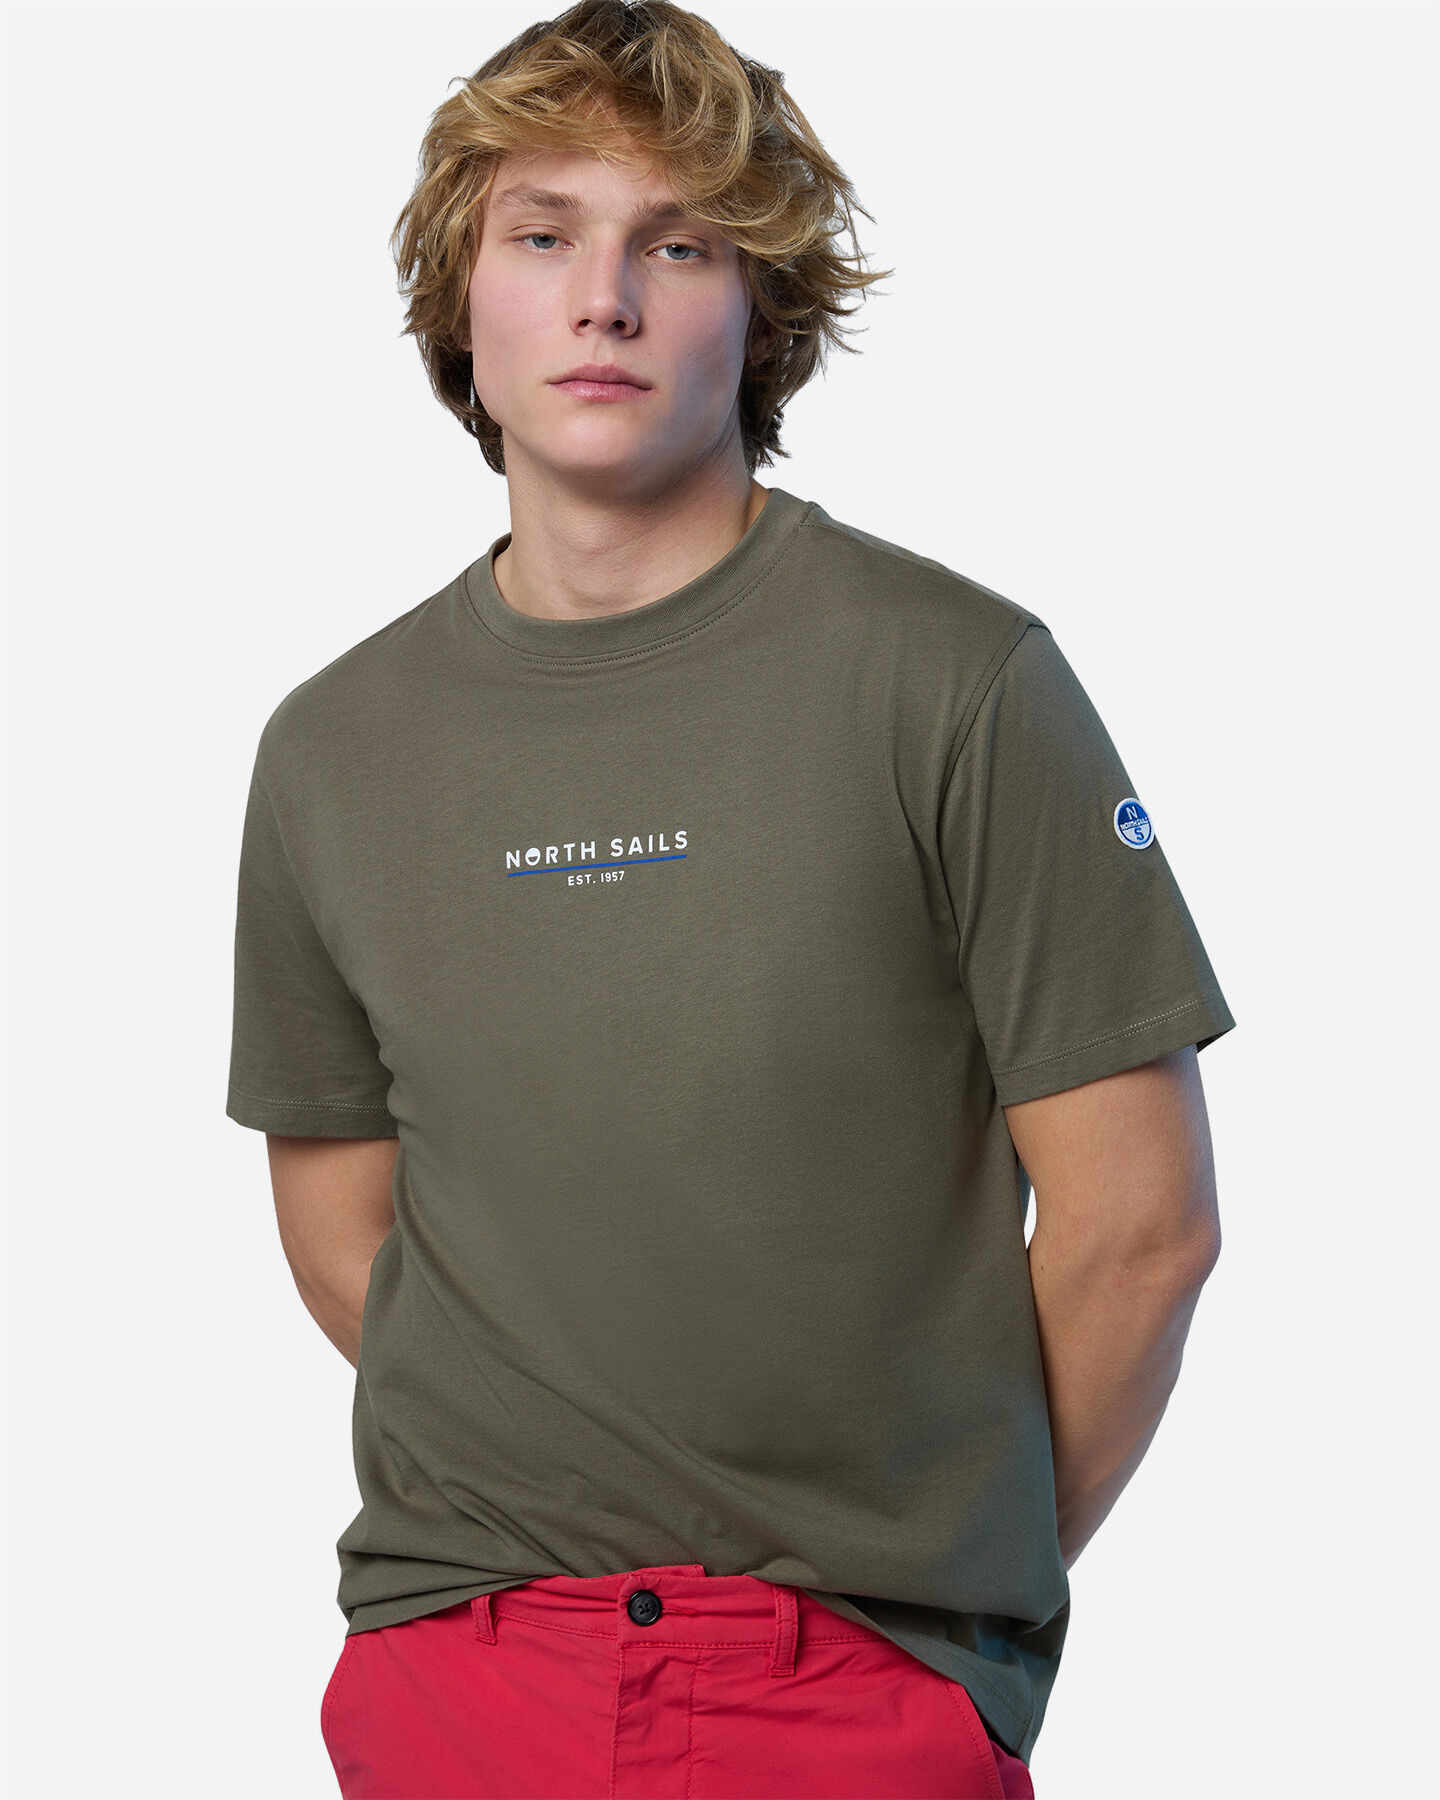  T-Shirt NORTH SAILS NEW LOGO M S5684008|0441|S scatto 2